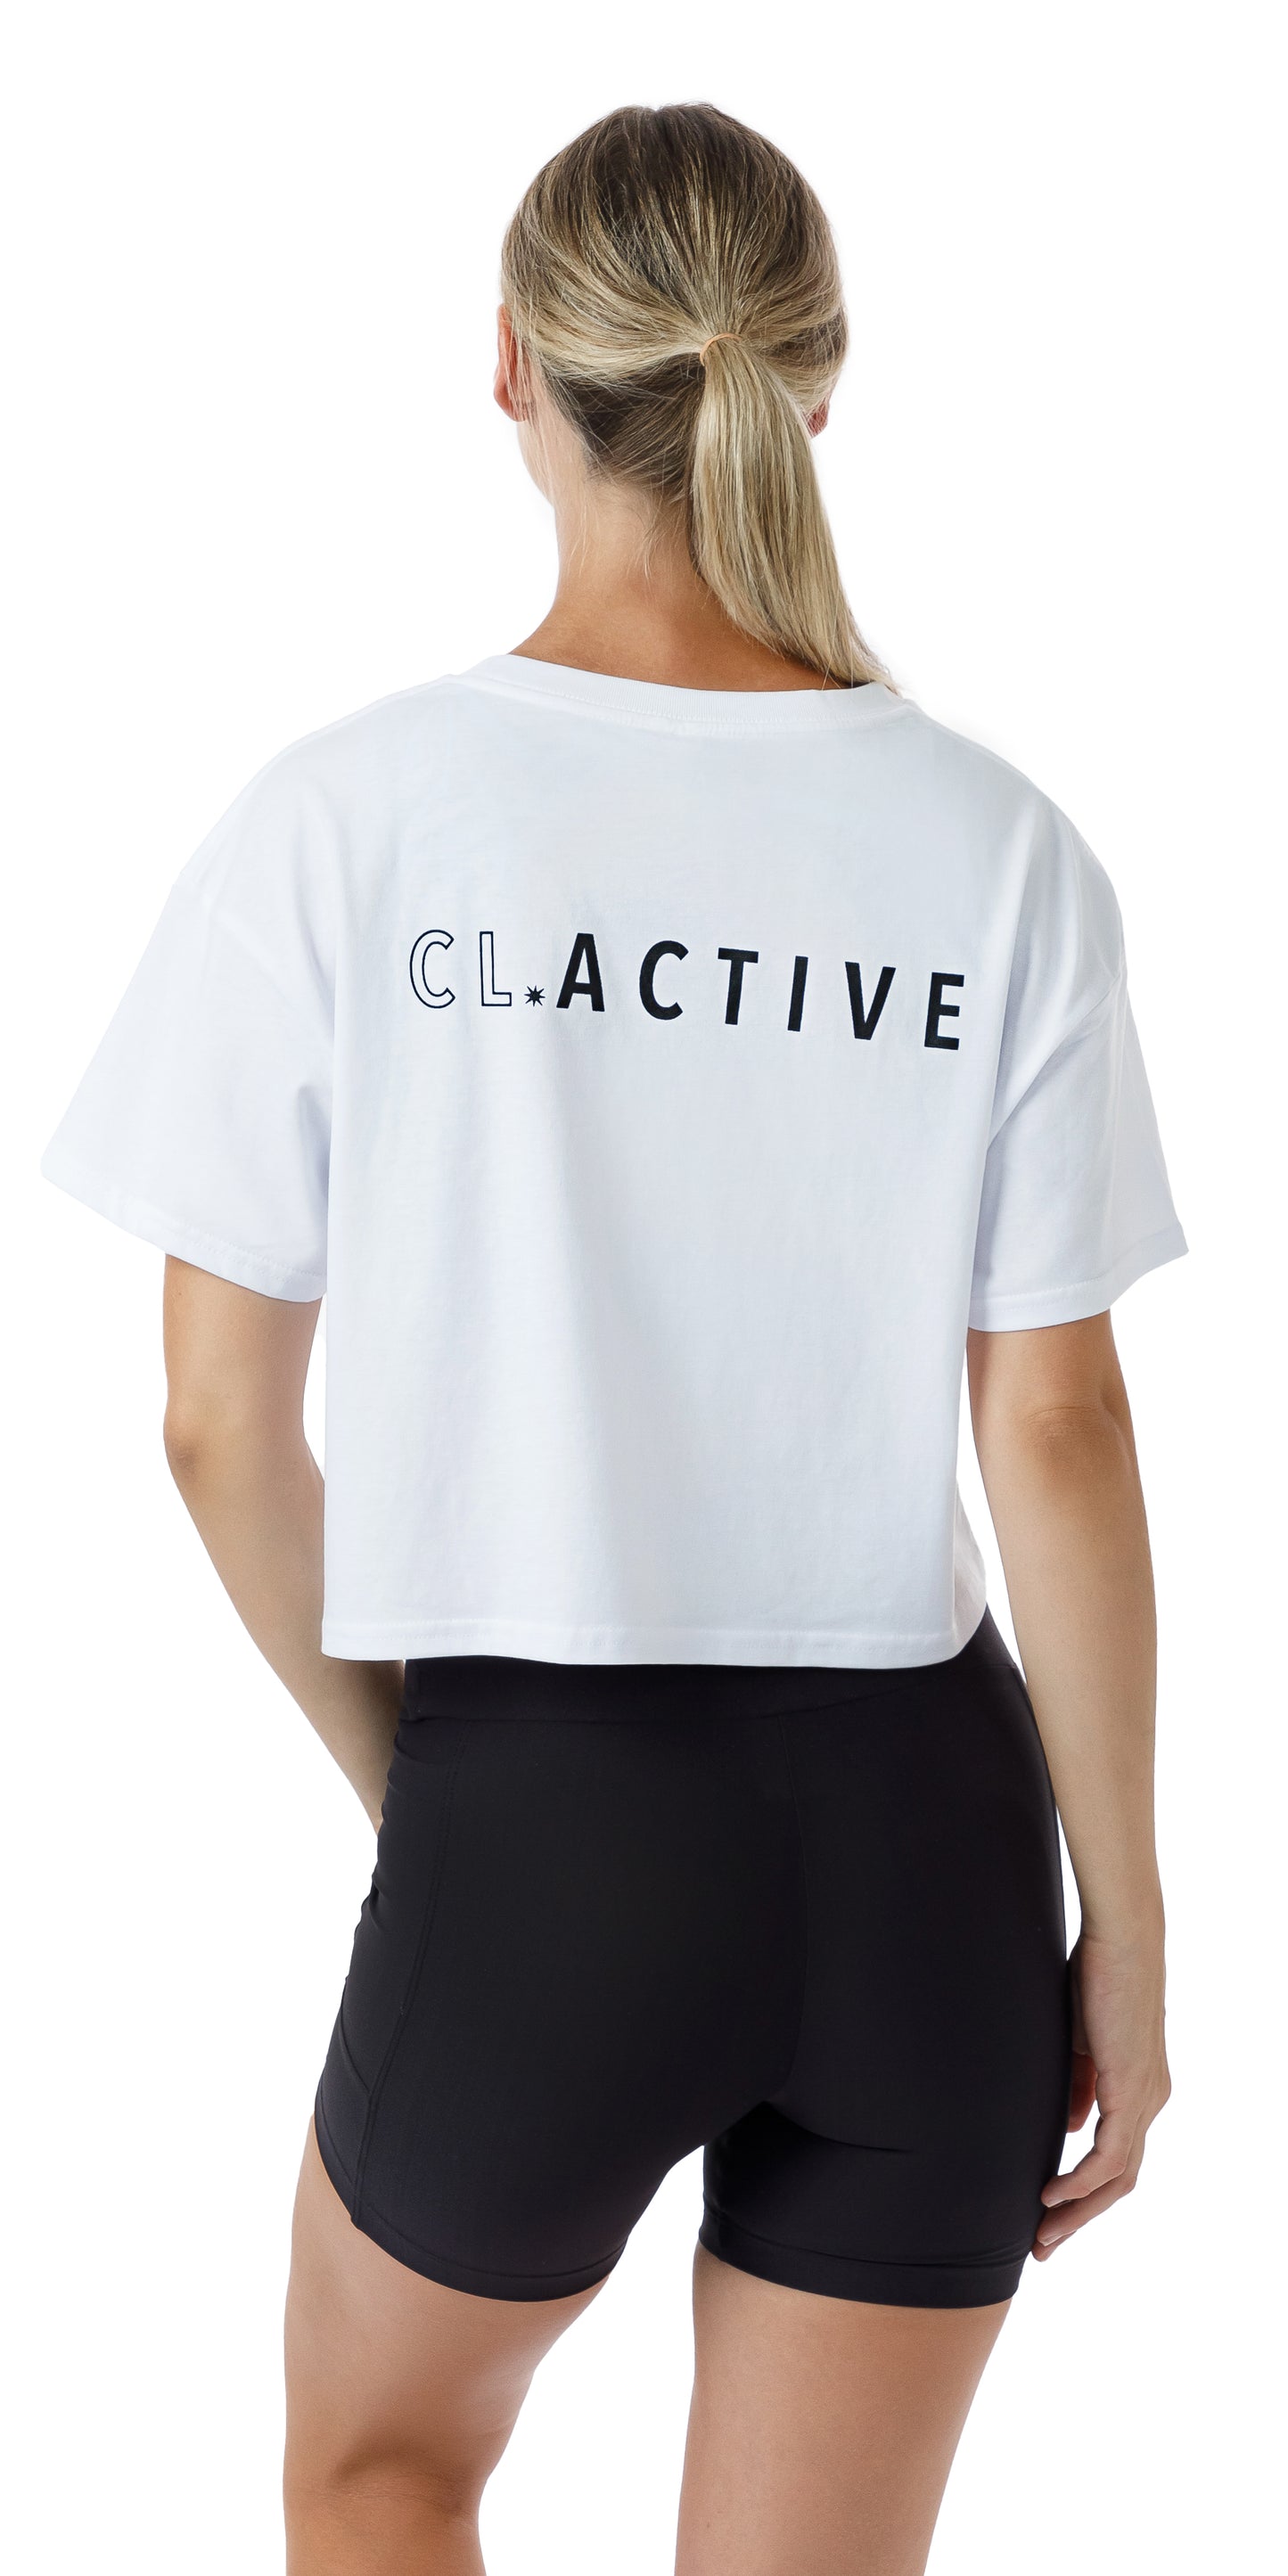 Back view of lady in White CL Active Crop Tee and black shorts lifting left knee and putting left hand on lap